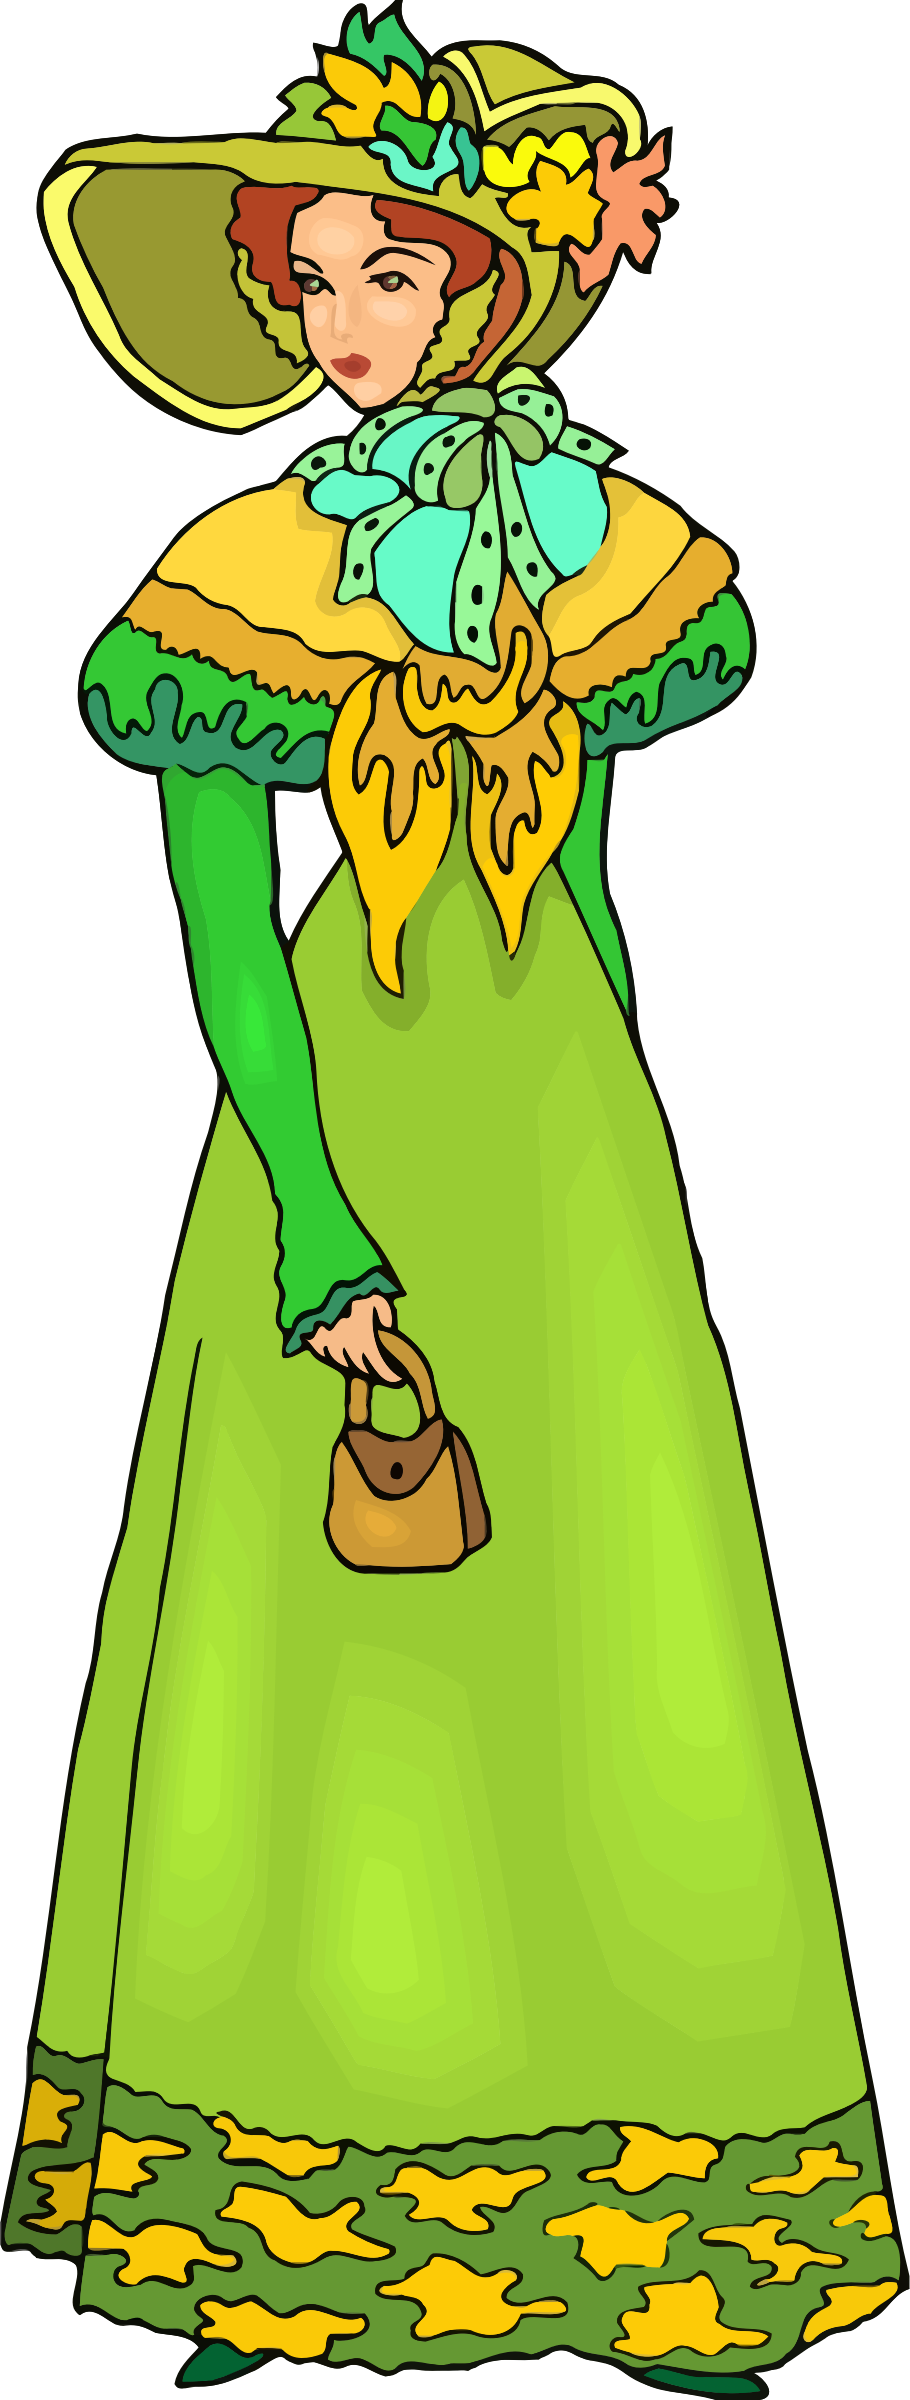 Download Elegant Lady in green vector clipart image - Free stock ...